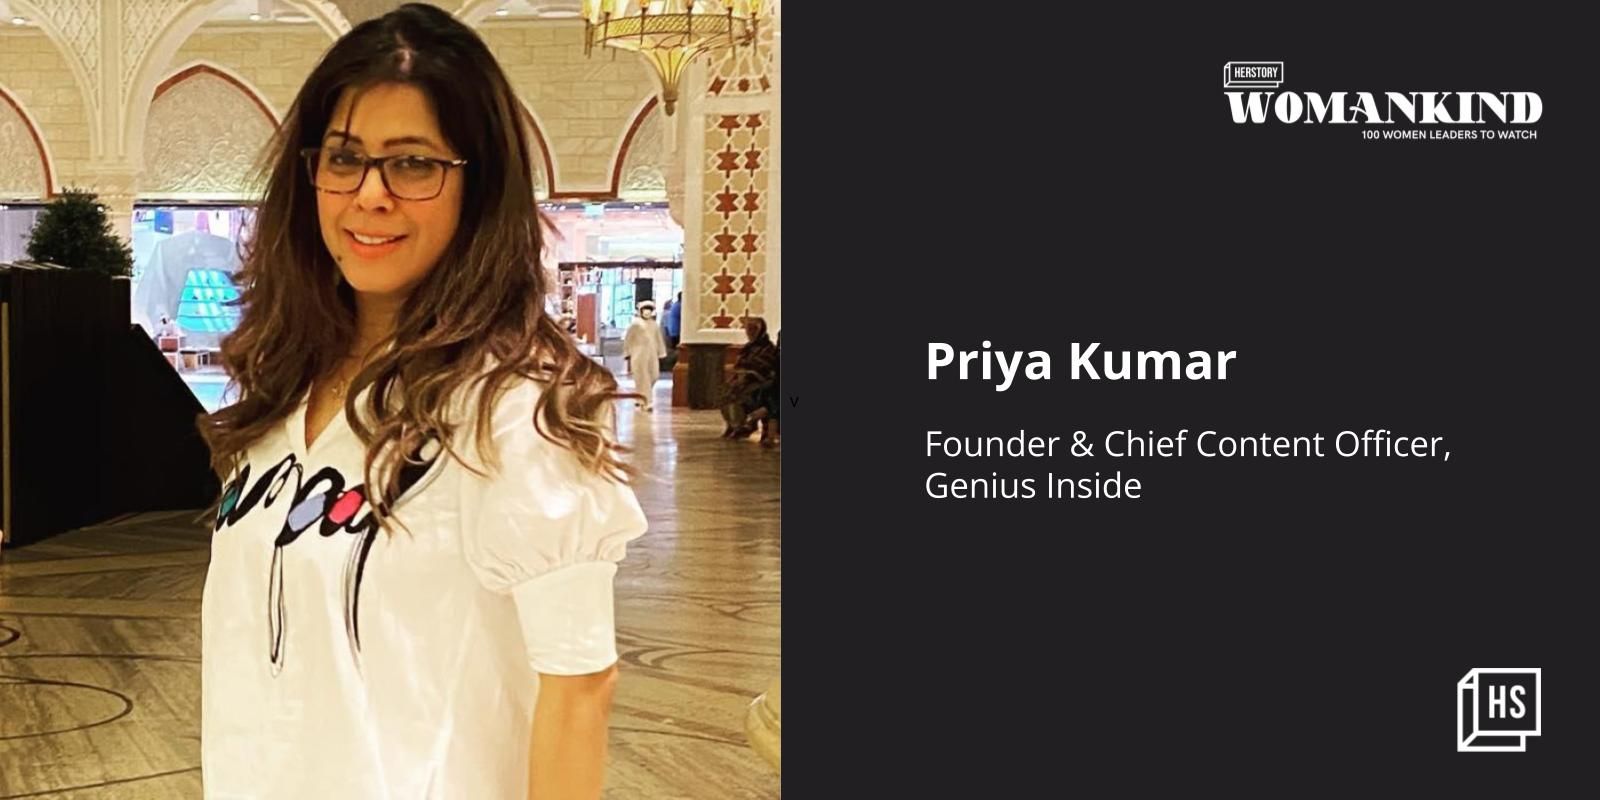 [100 Emerging Women Leaders] From being the odd one out to helping people become unique, the story of motivational speaker Priya Kumar 